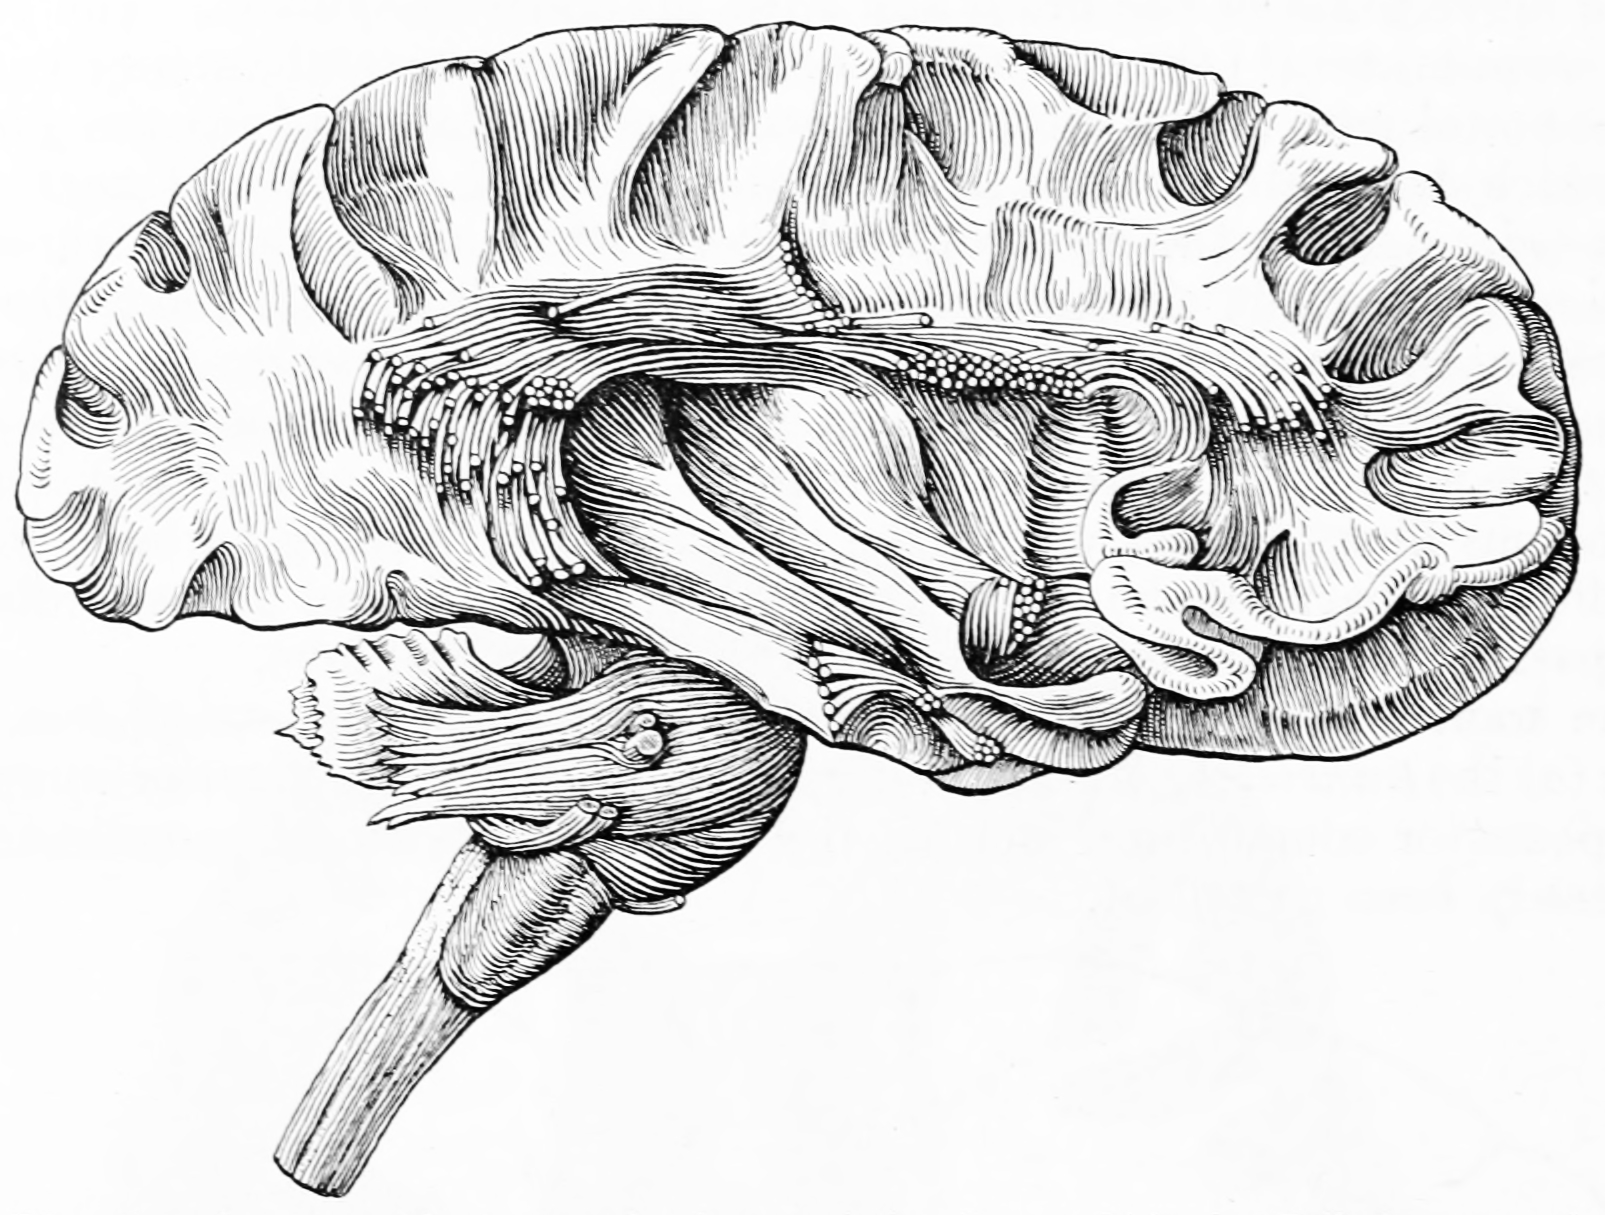 Dissection of cortex and brainstem showing association fibers after removing of the gray matter. From Gray Henry, Anatomy of the Human Body. 20th Edition, Lea & Febiger, Philadelphia & New York, 1918